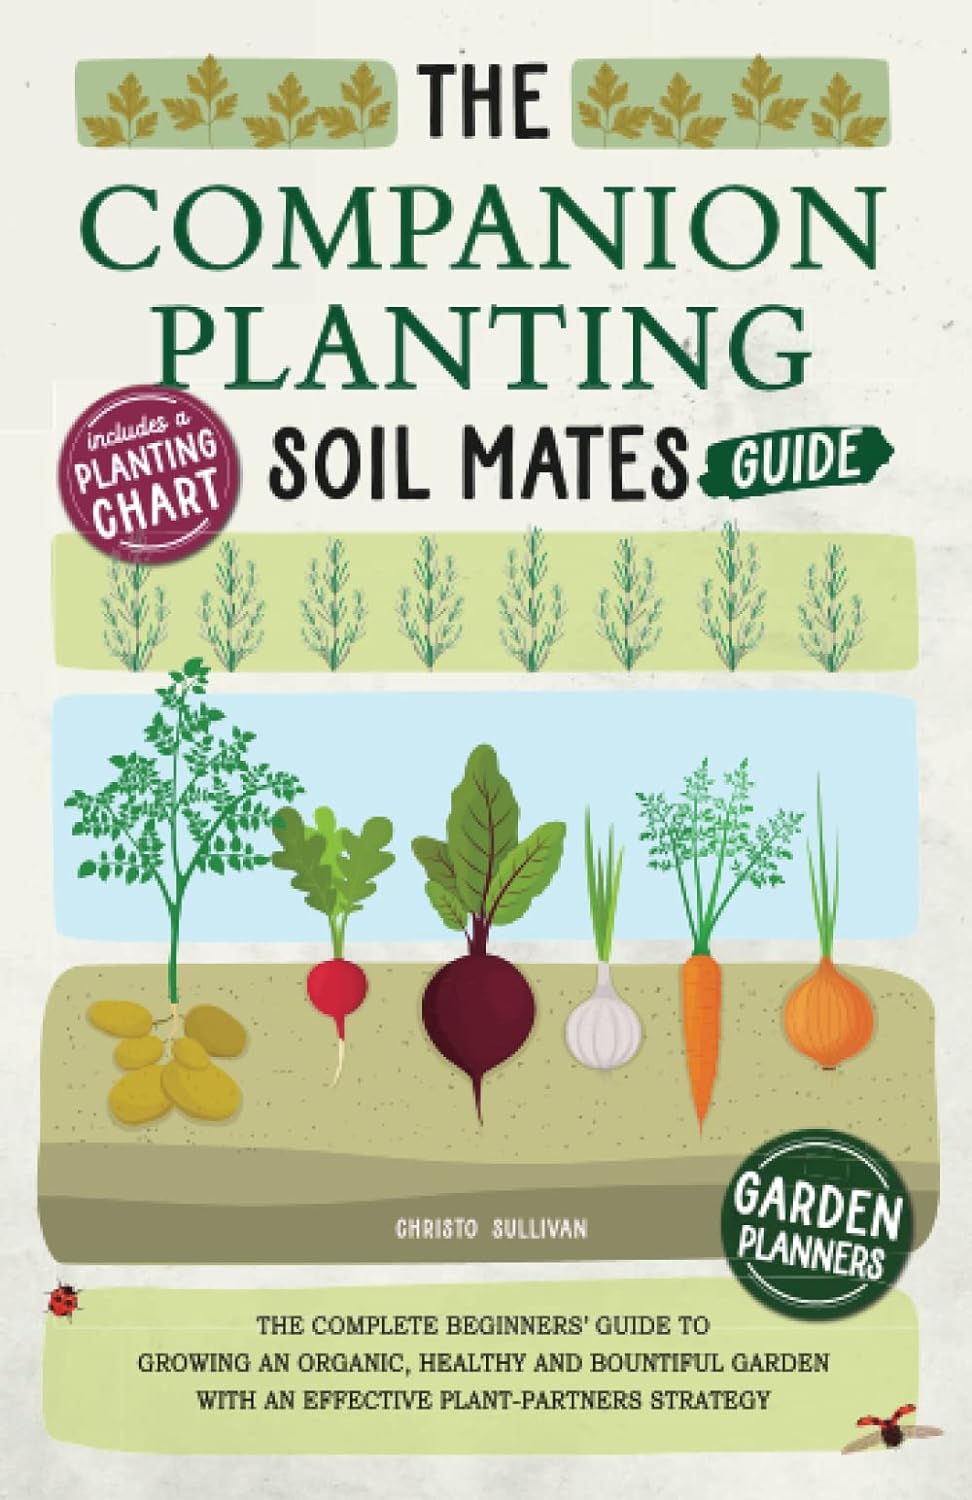 The Companion Planting Soil Mates Guide: The Complete Beginners\' Guide to Growing an Organic, Healthy and Bountiful Garden with an Effective ... Companion Planting Chart and Garden Planners